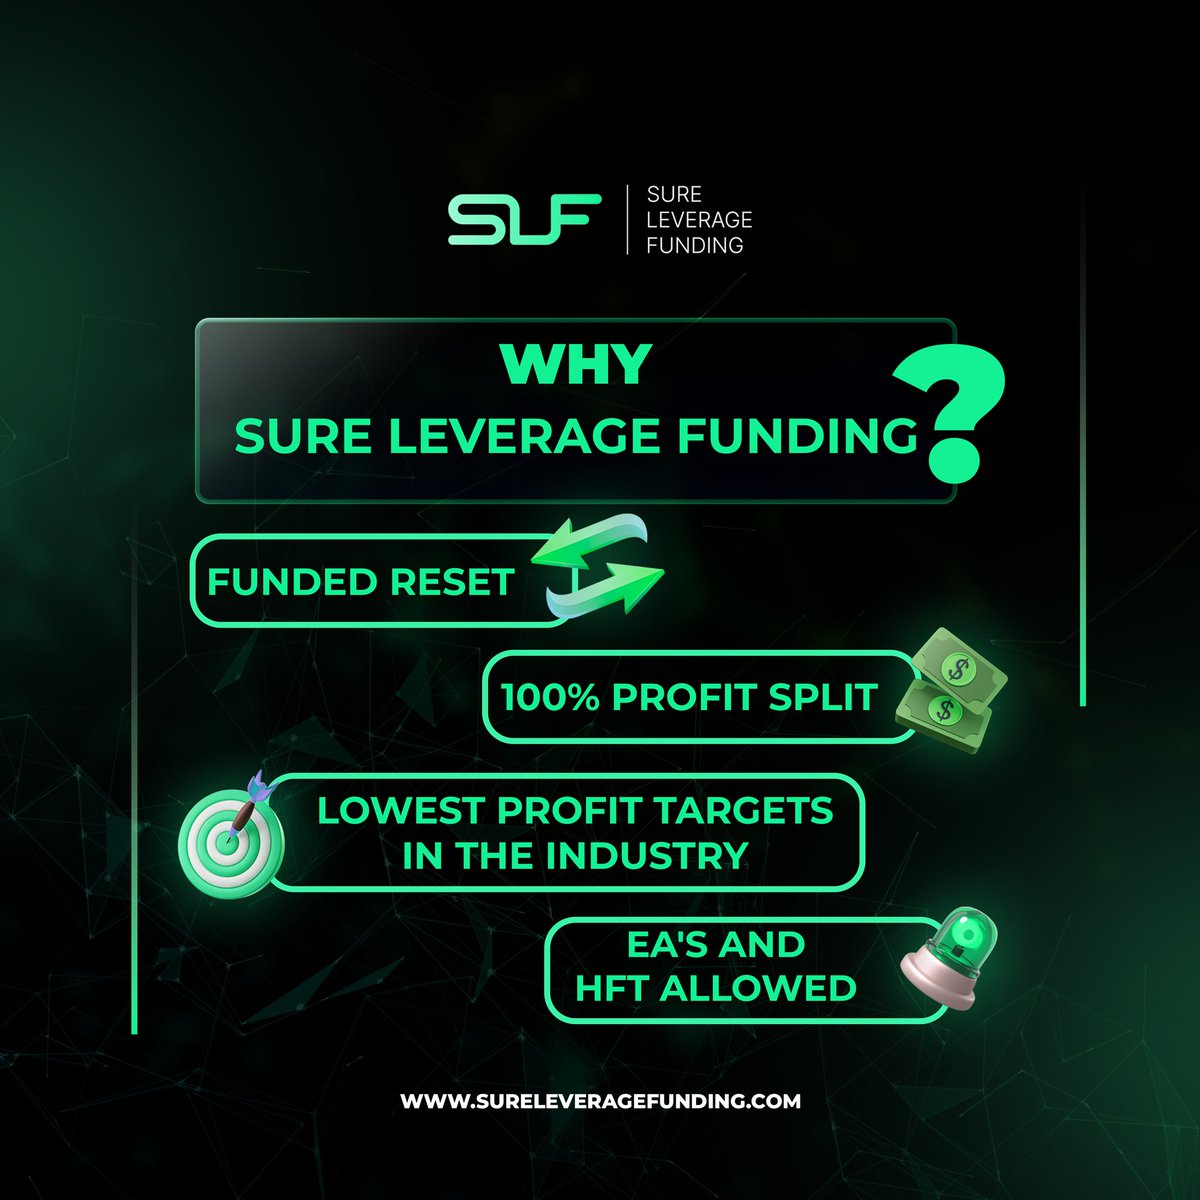 Experience the Power of Leverage Funding with Guaranteed Profit Splits, Industry-Low Targets, and EA's & HFT Welcome!
.
Learn more at sureleveragefunding.com